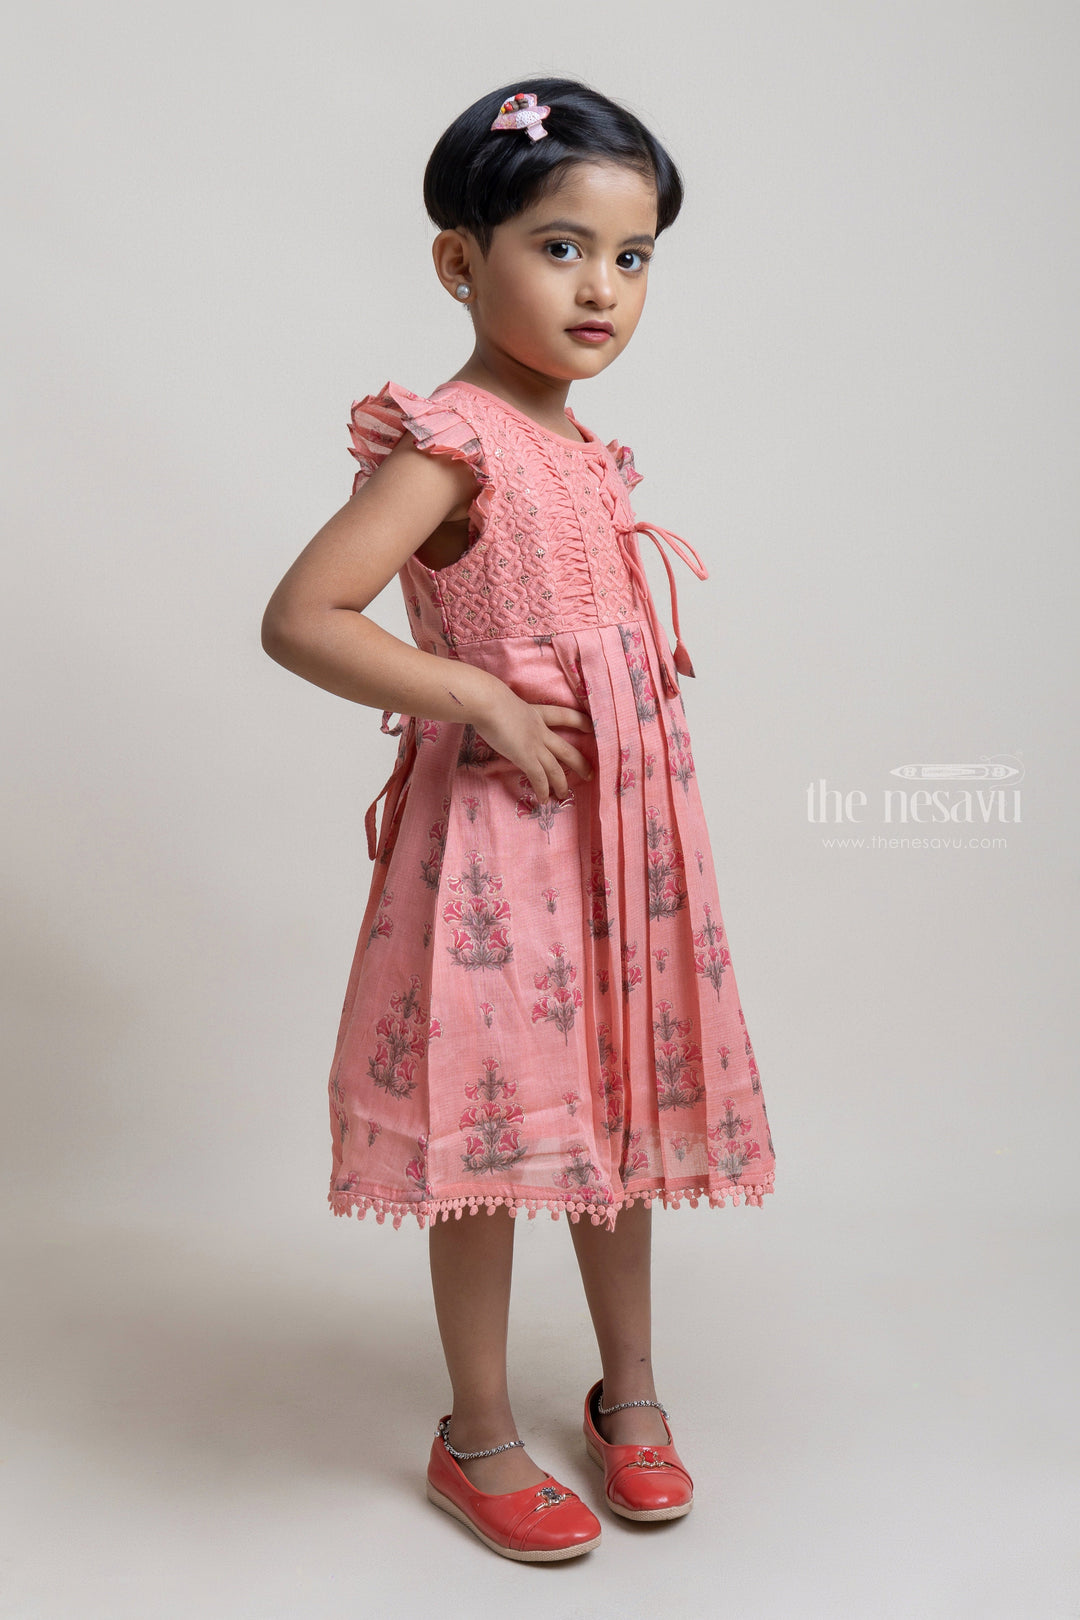 The Nesavu Girls Cotton Frock Pretty Salmon Floral Embroidered Yoke And Floral Printed Cotton Frock for Girls Nesavu Fantastic Floral Printed Cotton Frock For Girls | Premium Cotton Frocks | The Nesavu